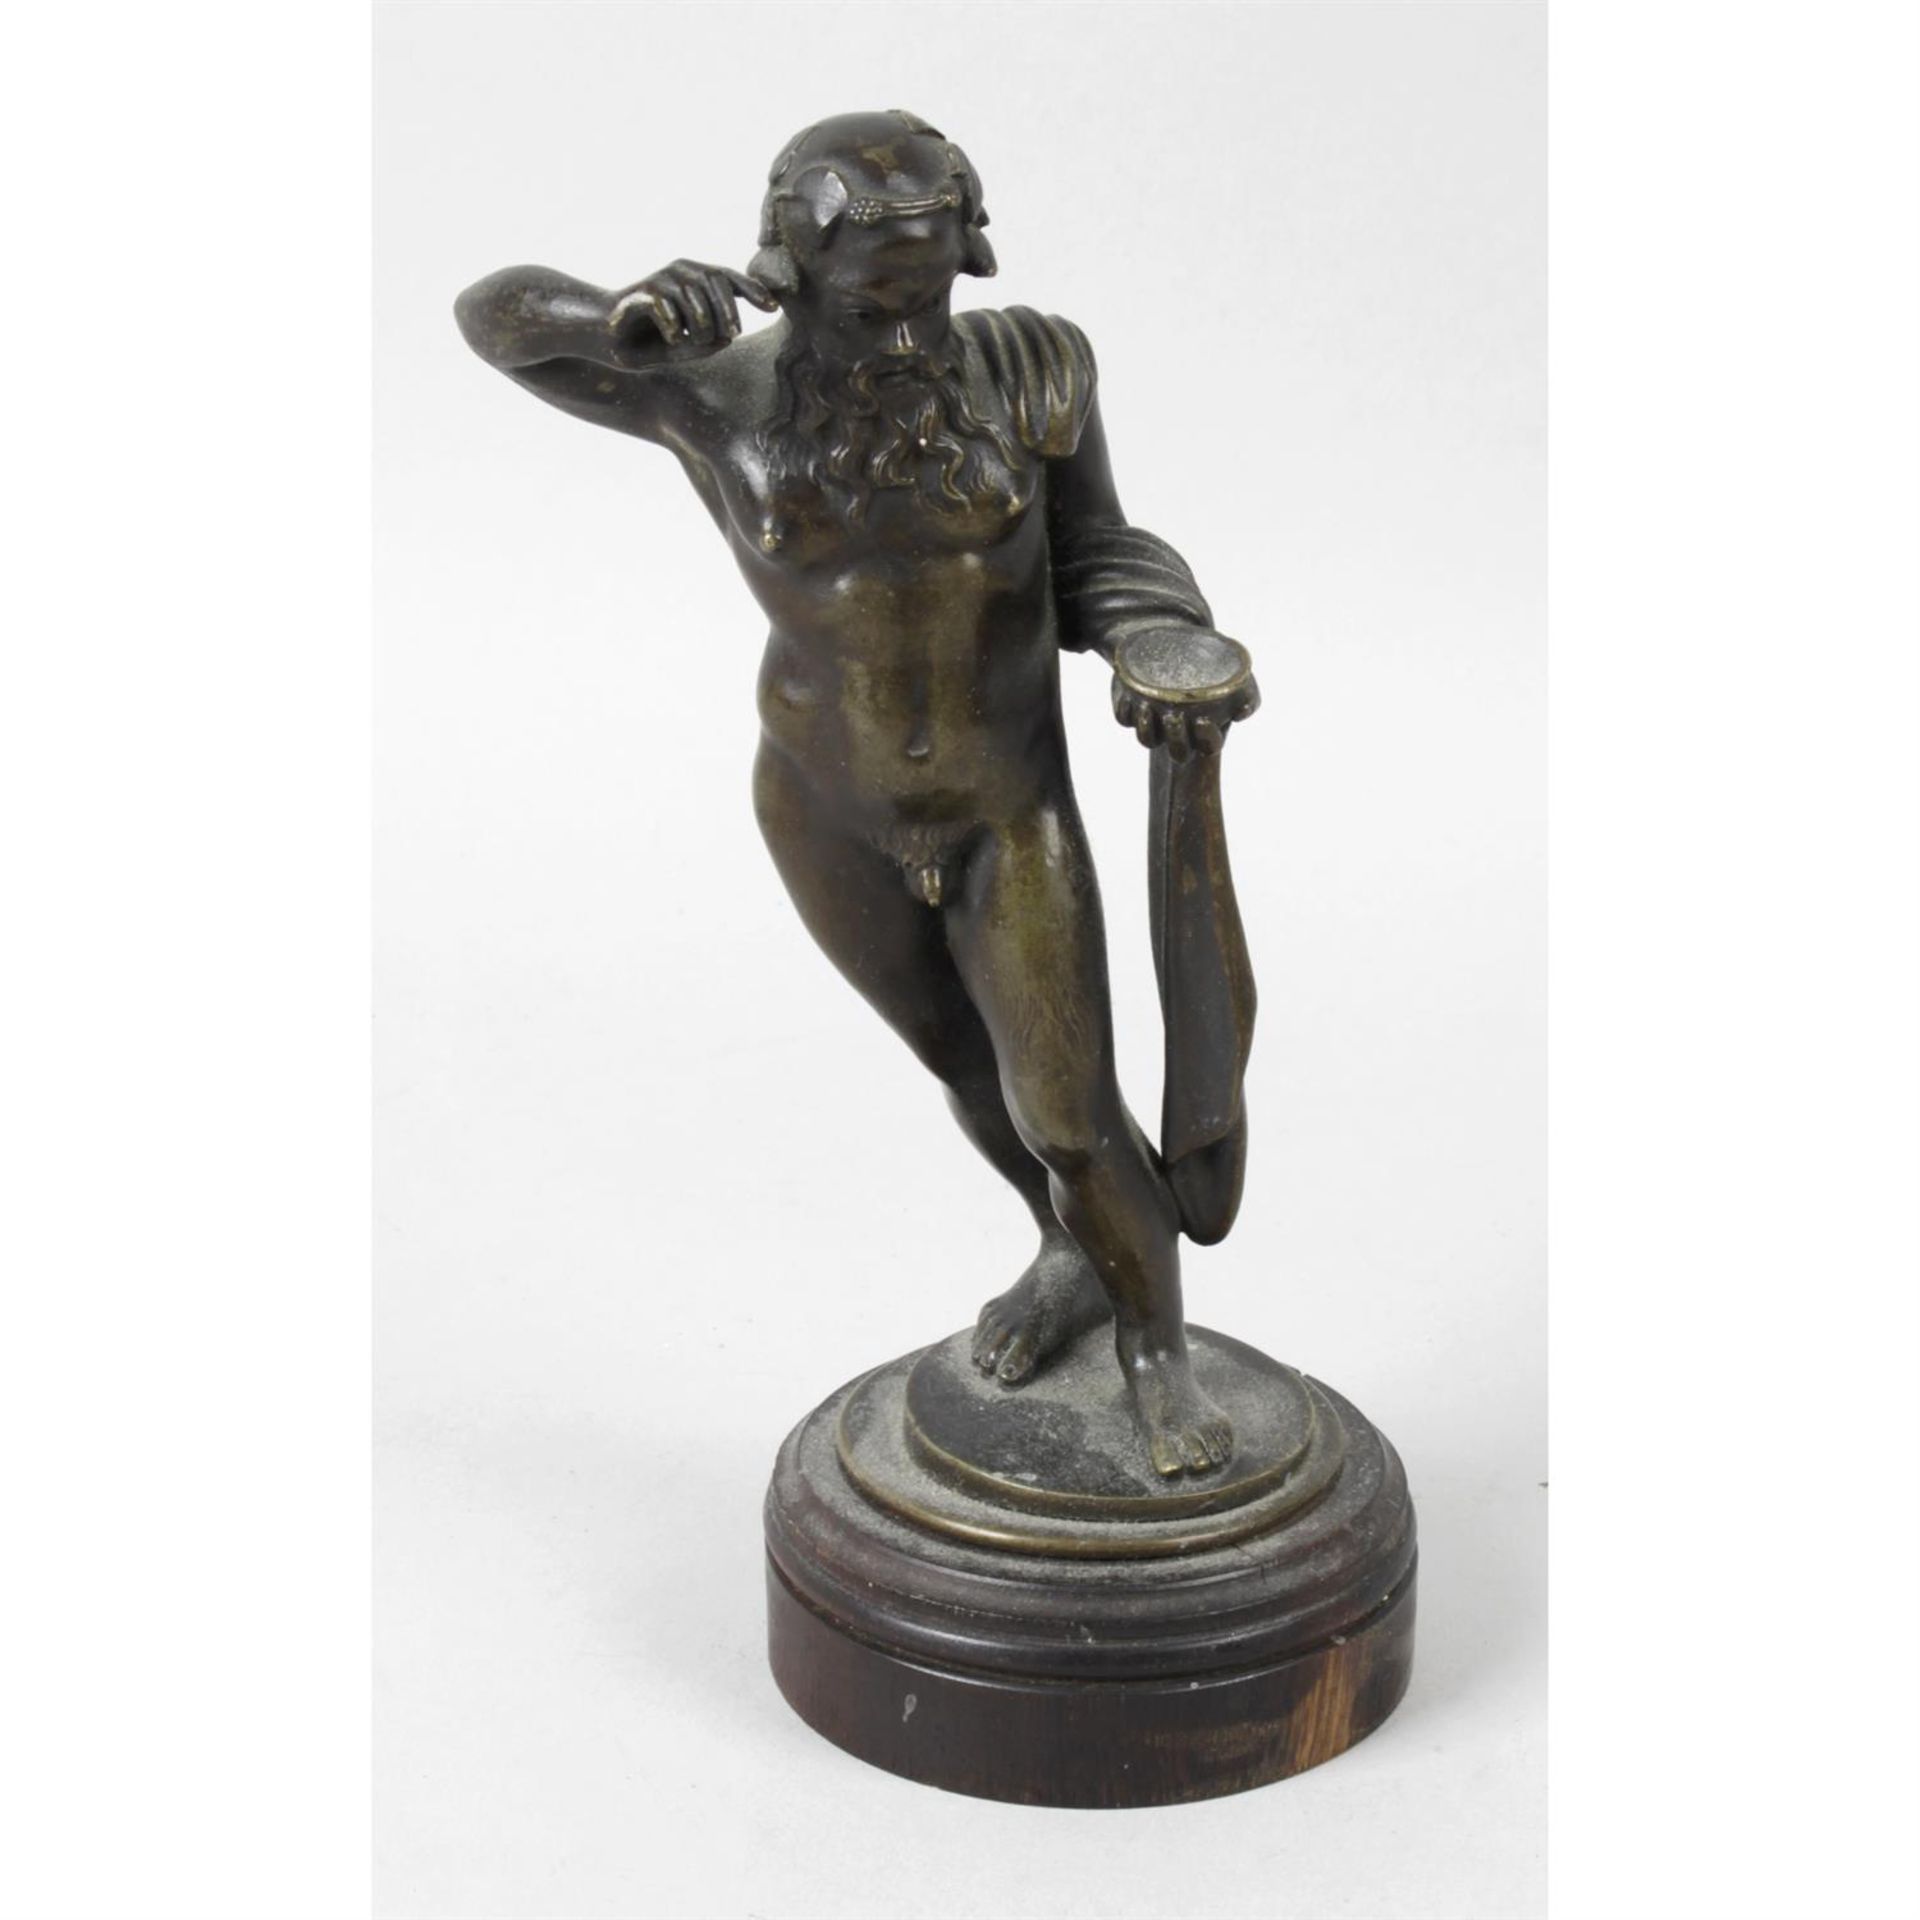 A 19th century bronze figure modelled as a bearded naked male.